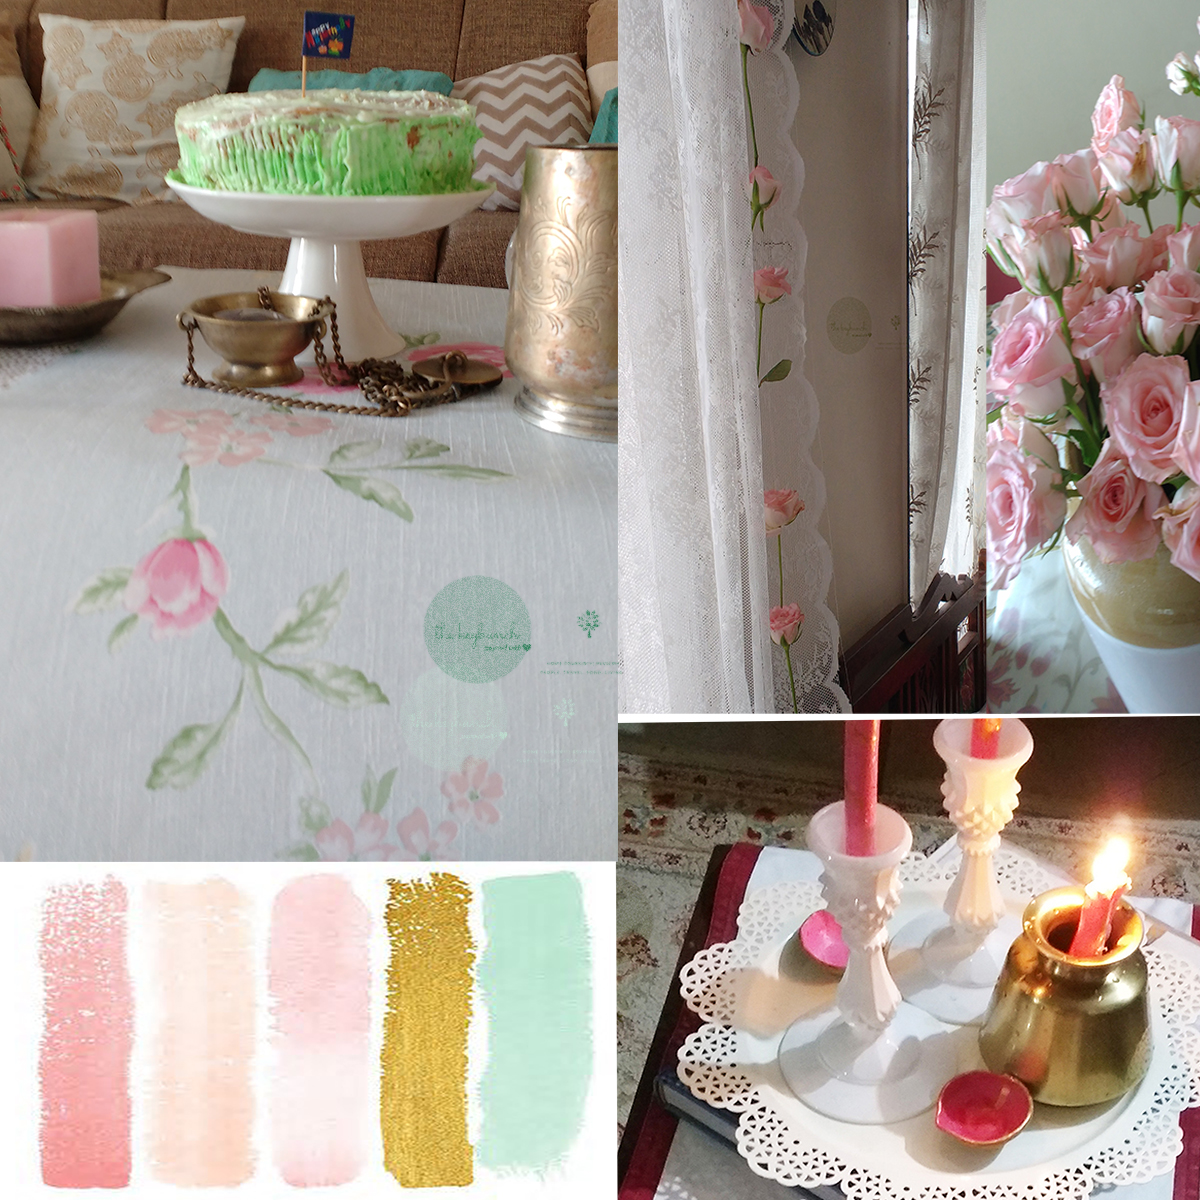 Refreshing new diwali palette: Muted pink and gold